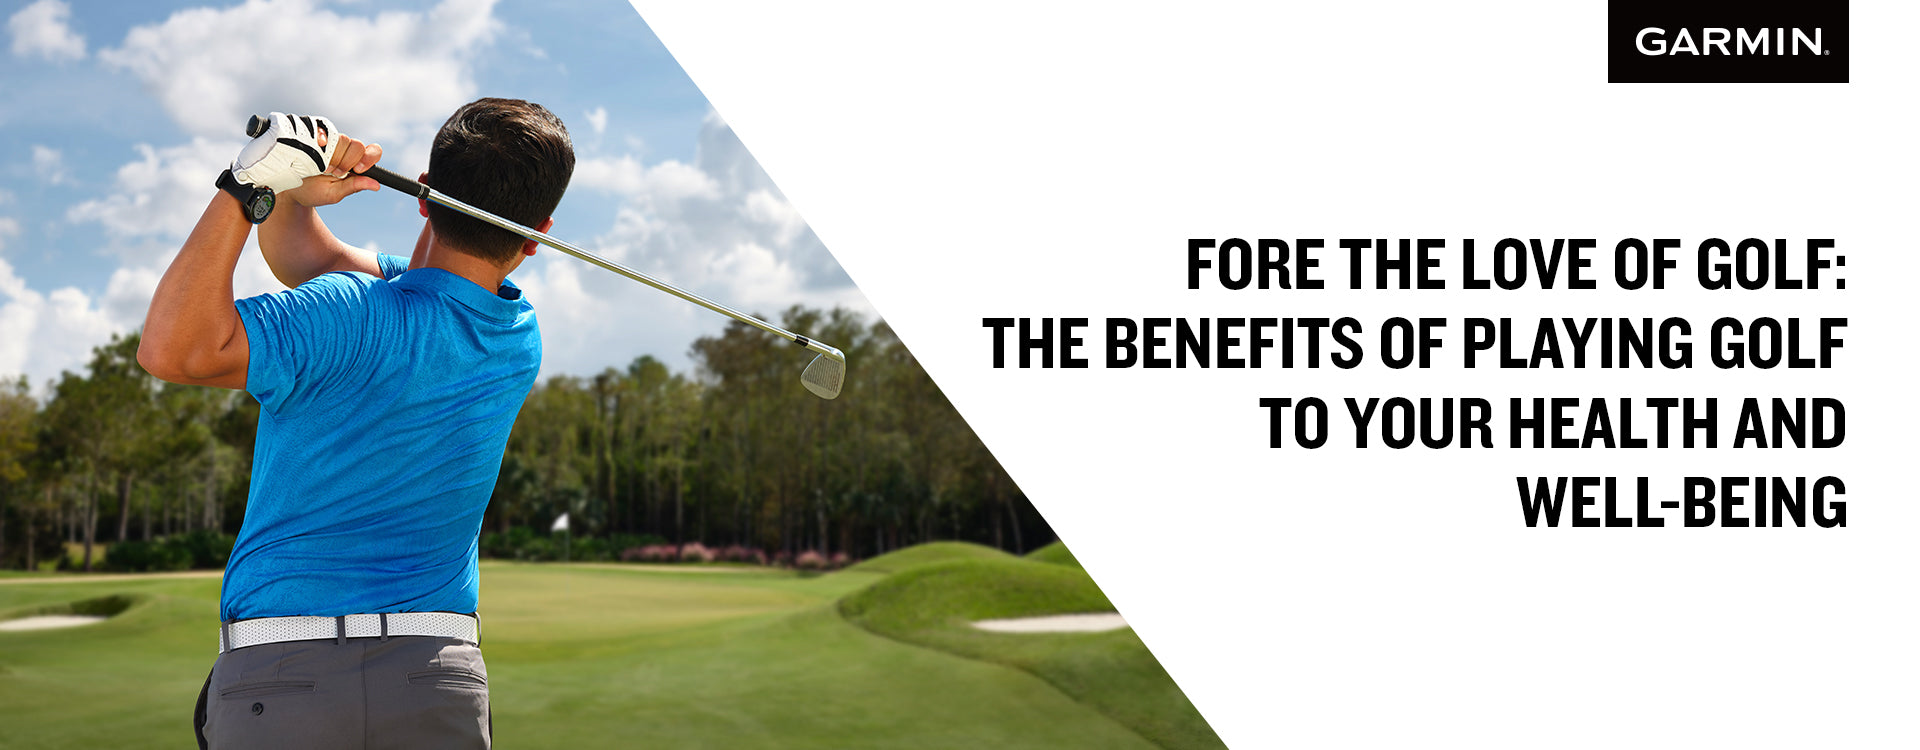 Fore the Love of Golf: The Benefits of Playing Golf to Your Health and Well-Being